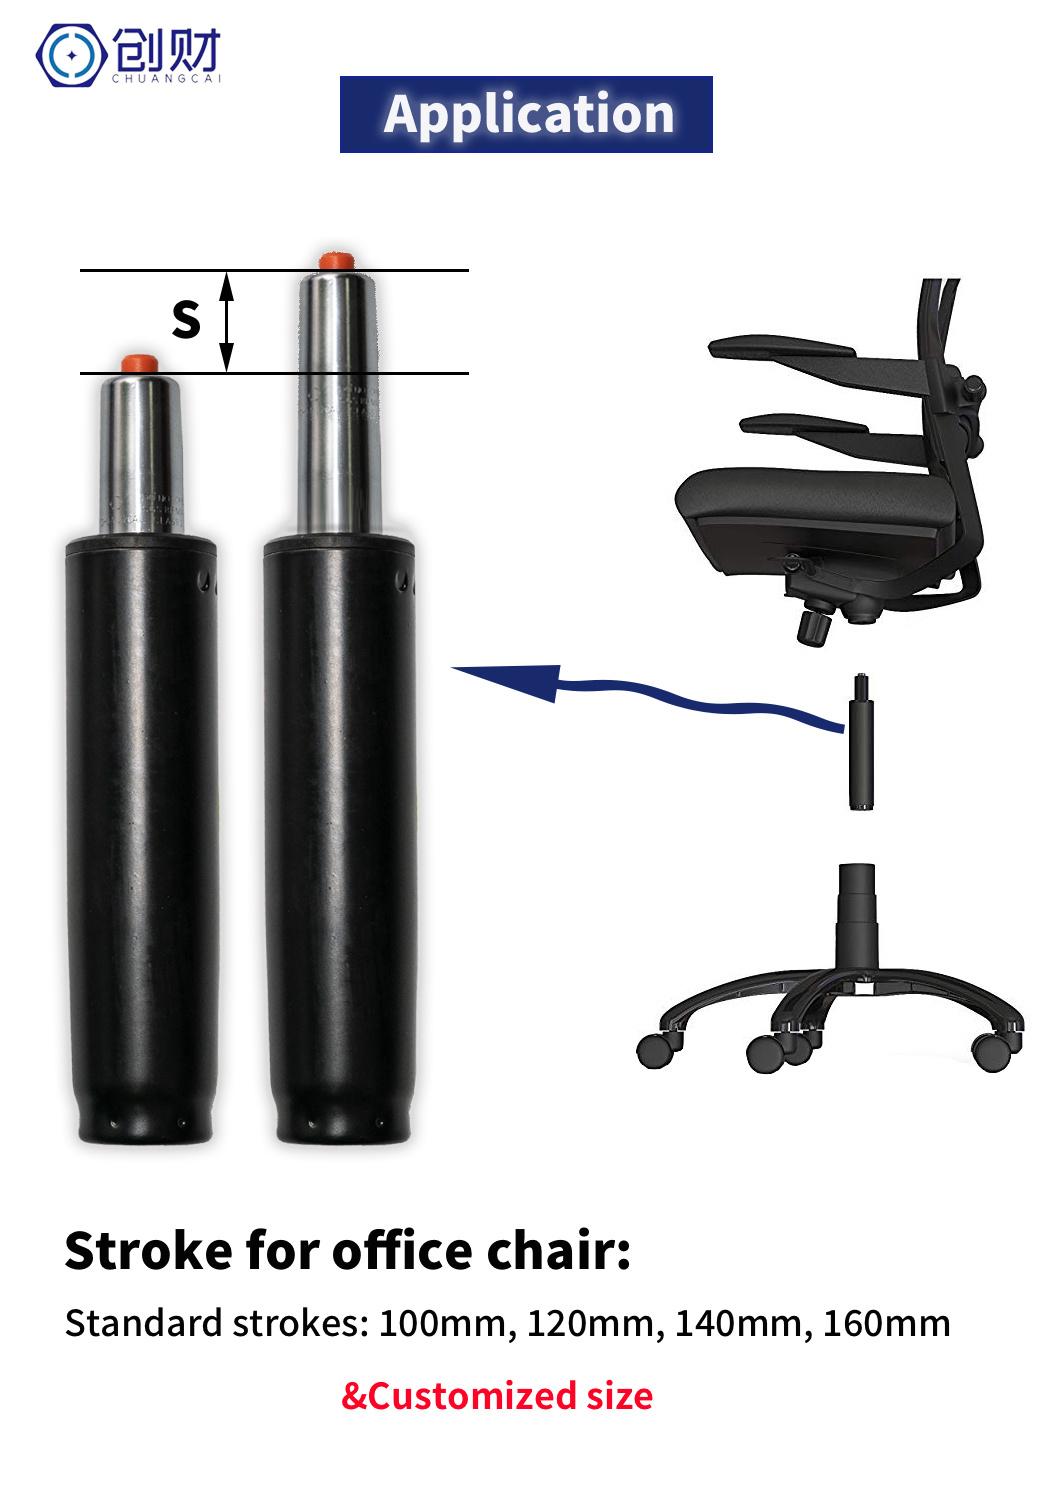 Gas Lift Gas Spring Chair Parts for Boss Office Executive Chair